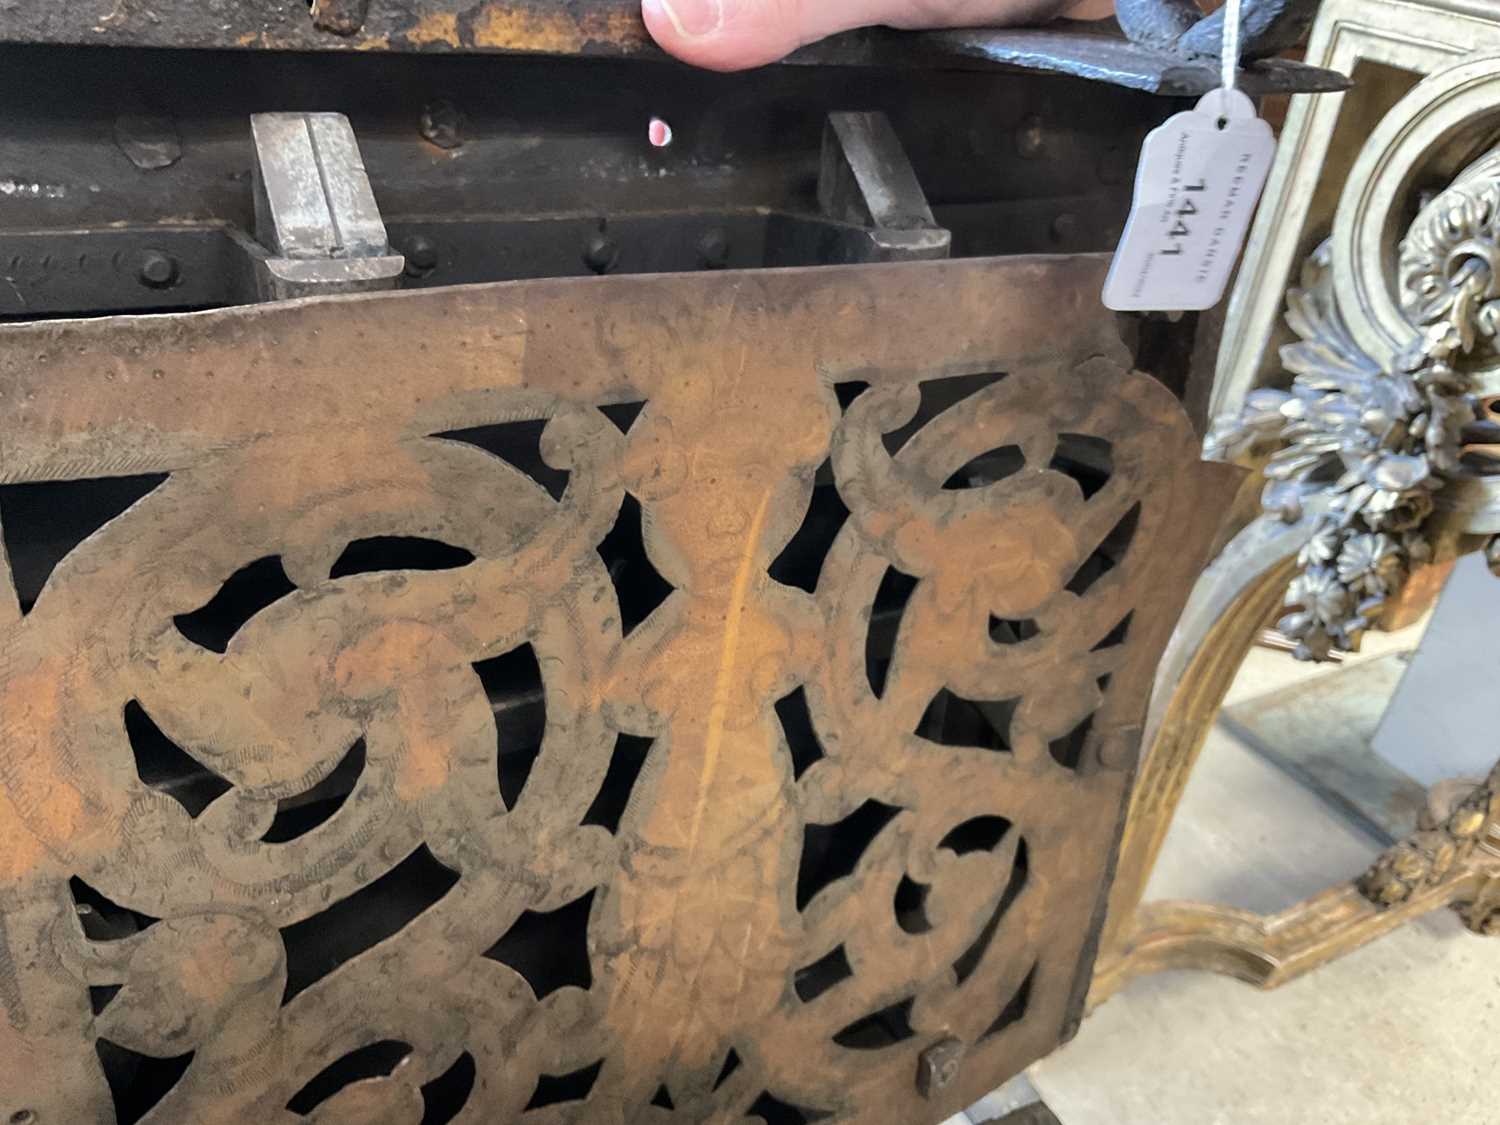 17th century German iron Armada chest with intricate locking system, key marked S. Morden - Image 11 of 23